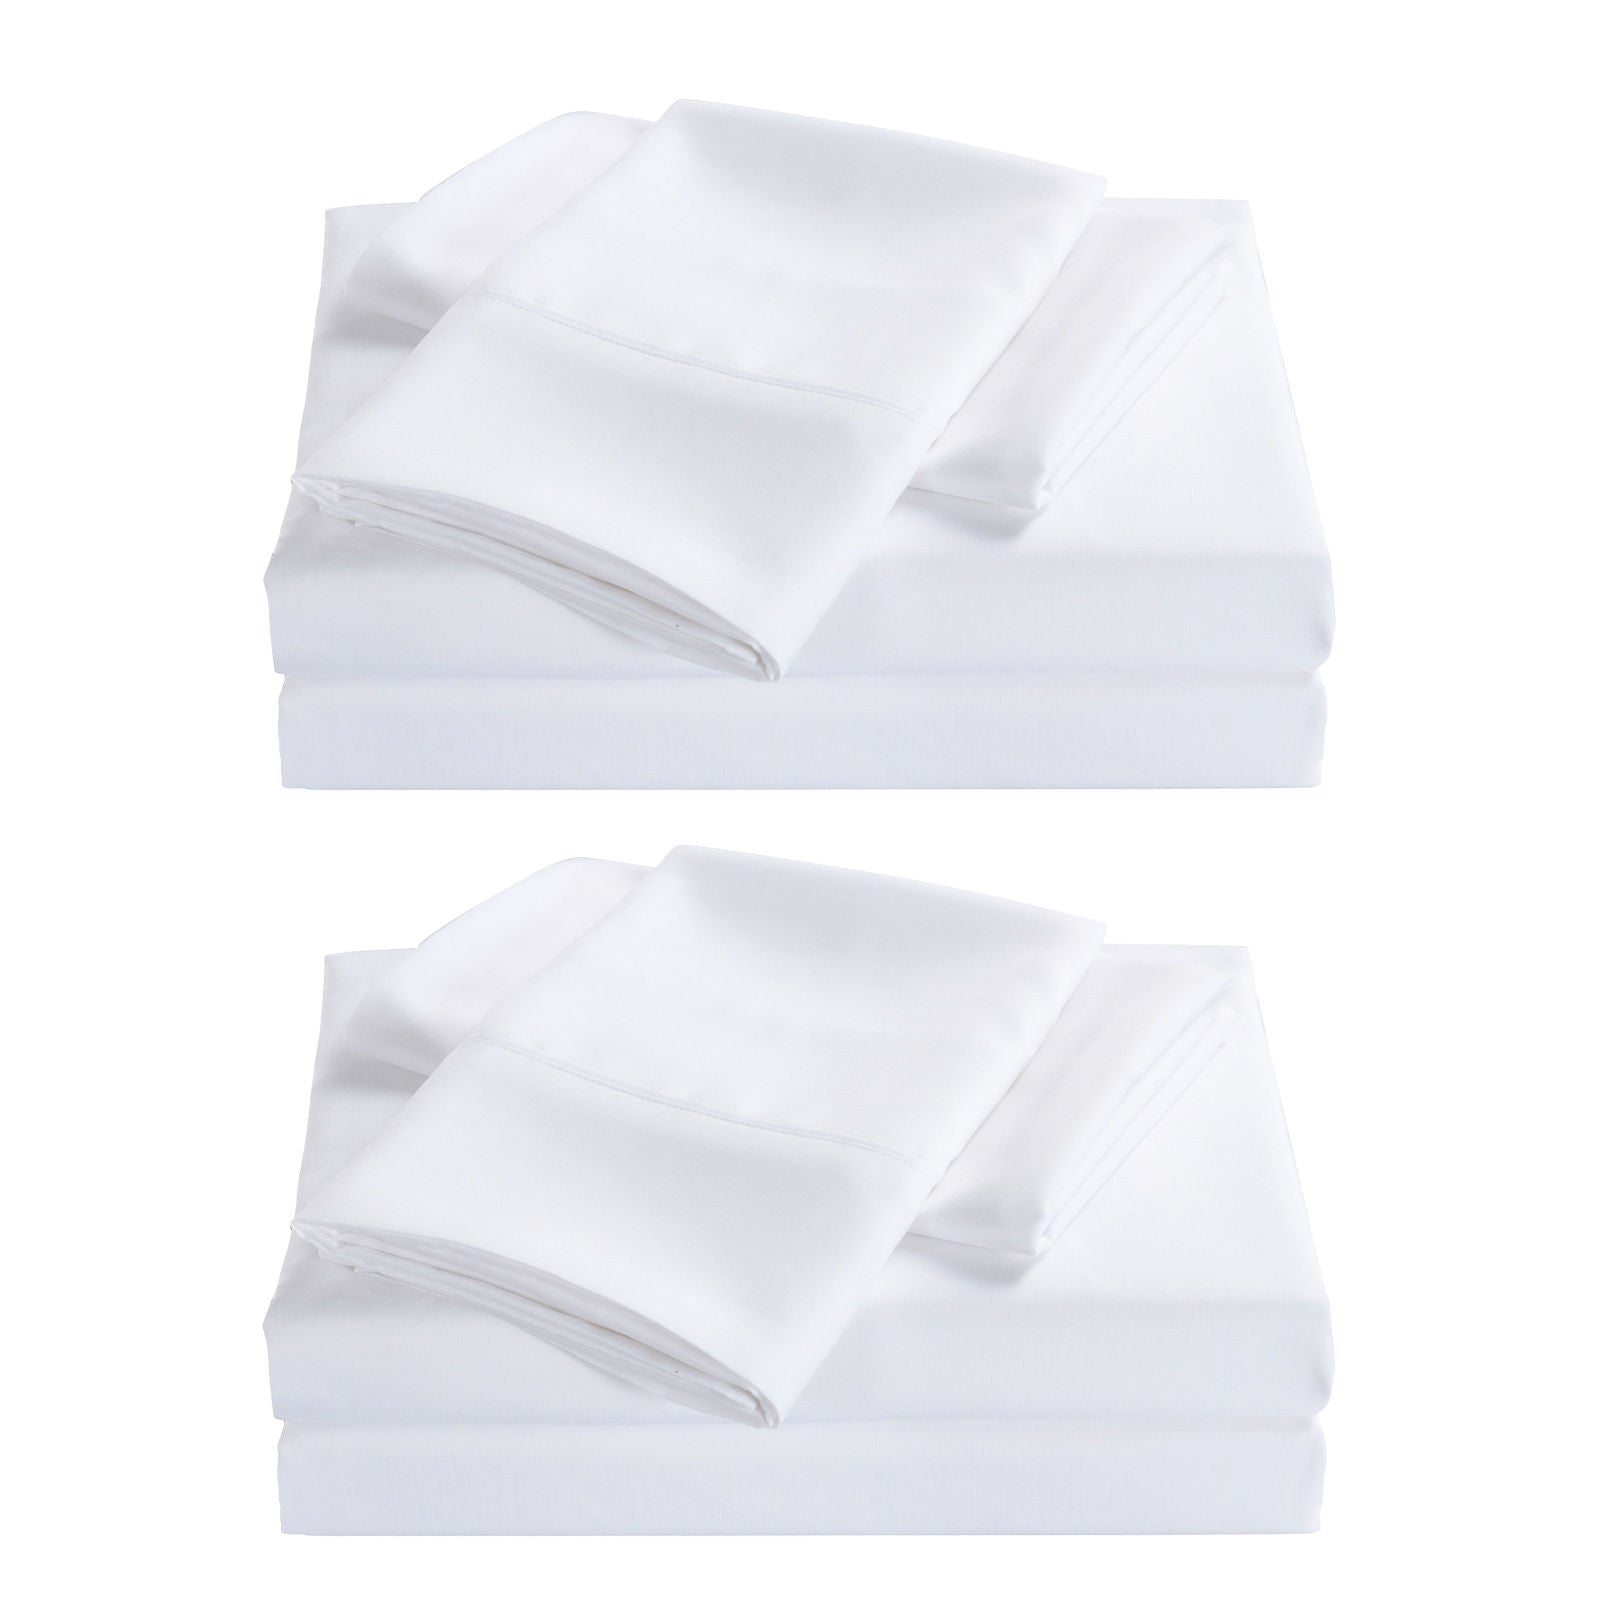 Royal Comfort 2000 Thread Count Original Bamboo Blend White Sheet Set 2 Pack-Bed Linen-PEROZ Accessories